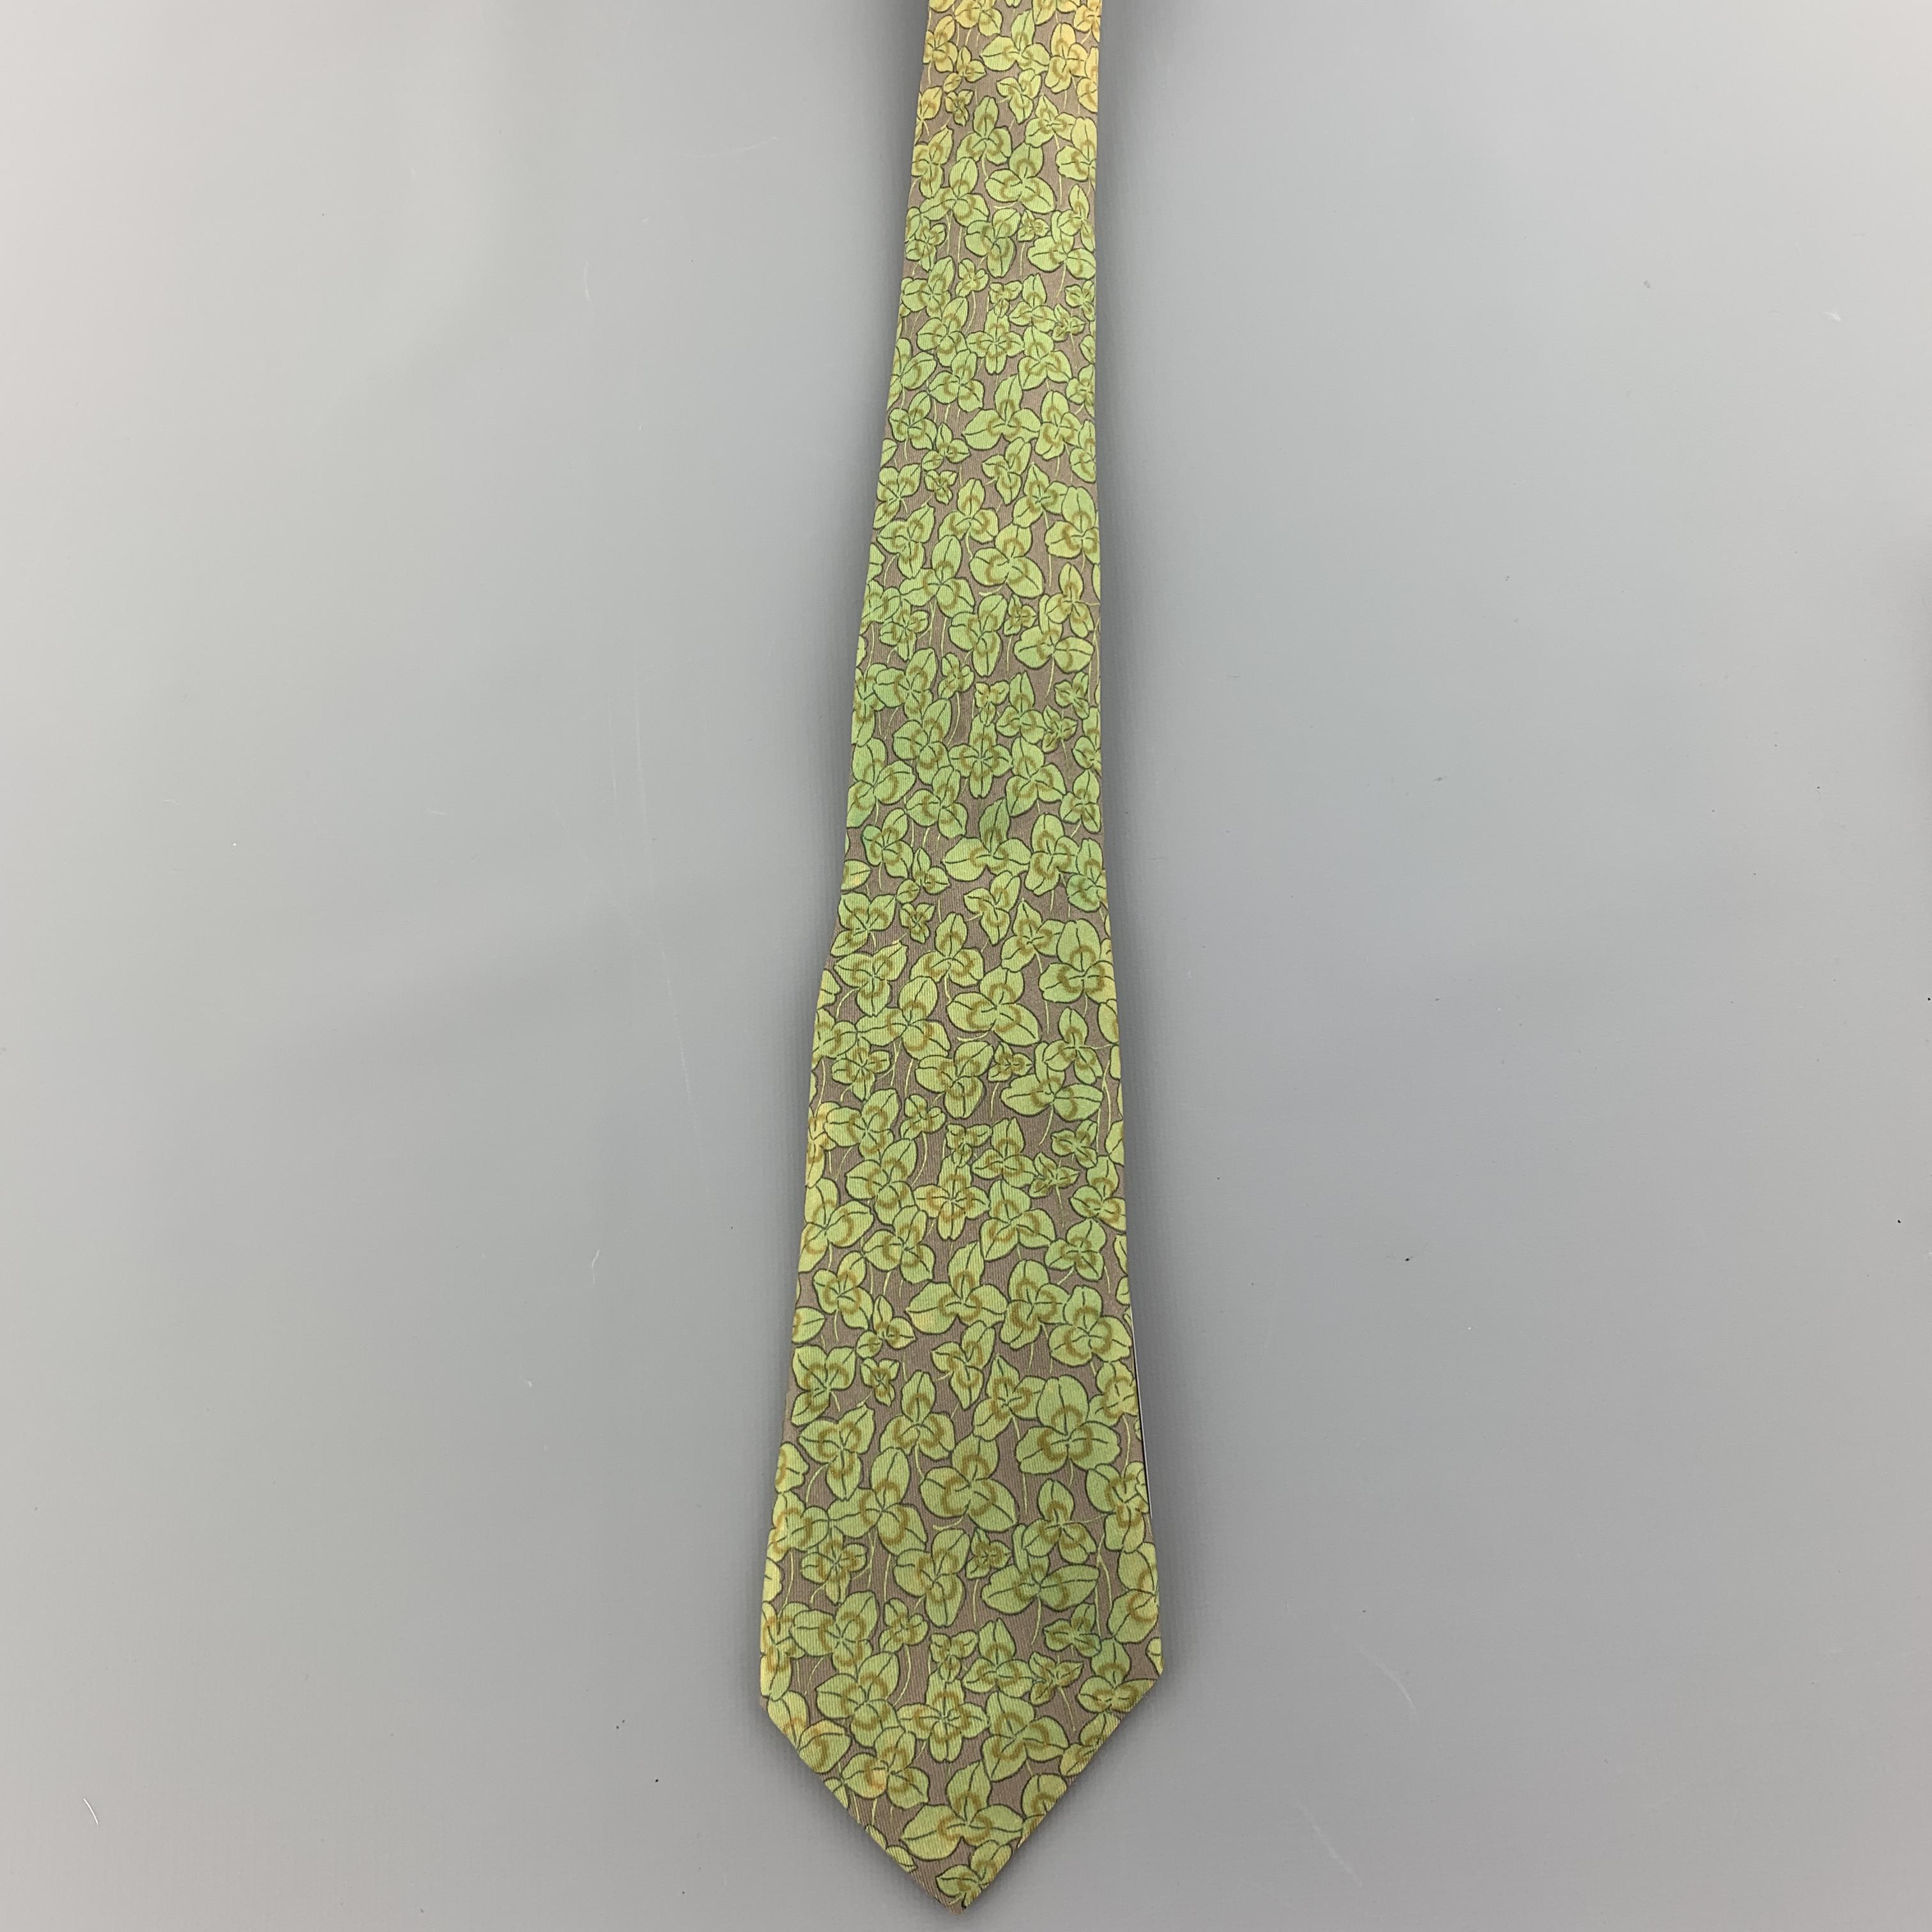 HERMES necktie comes in dark gray silk twill with all over green leaf print. Wear and discoloration throughout. As-is. Made in France.

Fair Pre-Owned Condition.

Width: 3.25 in.  